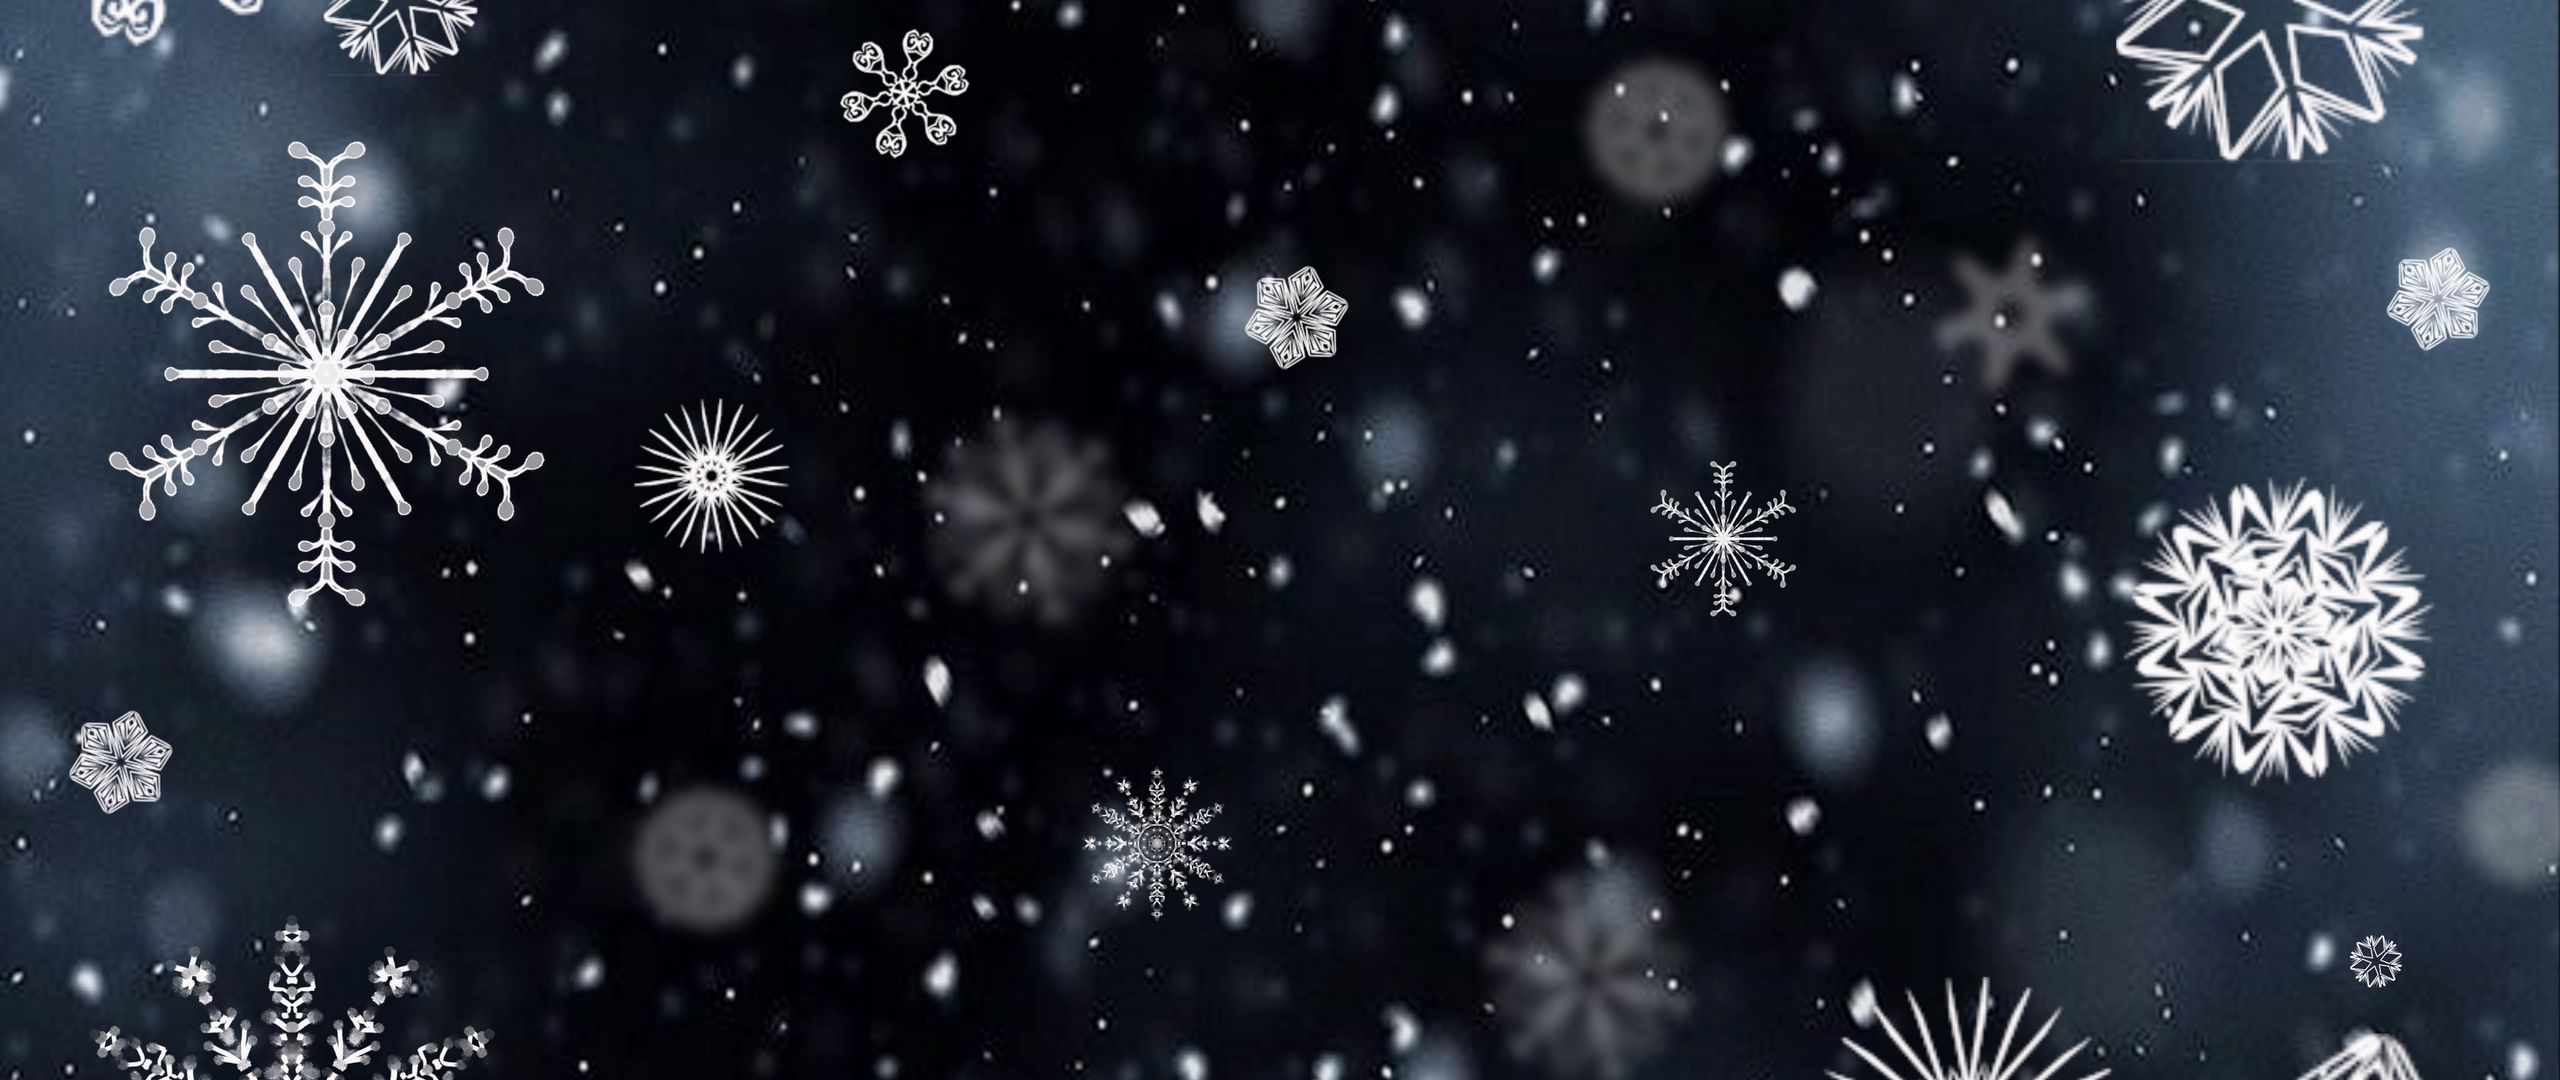 Download wallpaper 2560x1080 snowflakes, patterns, texture, winter dual wide 1080p HD background